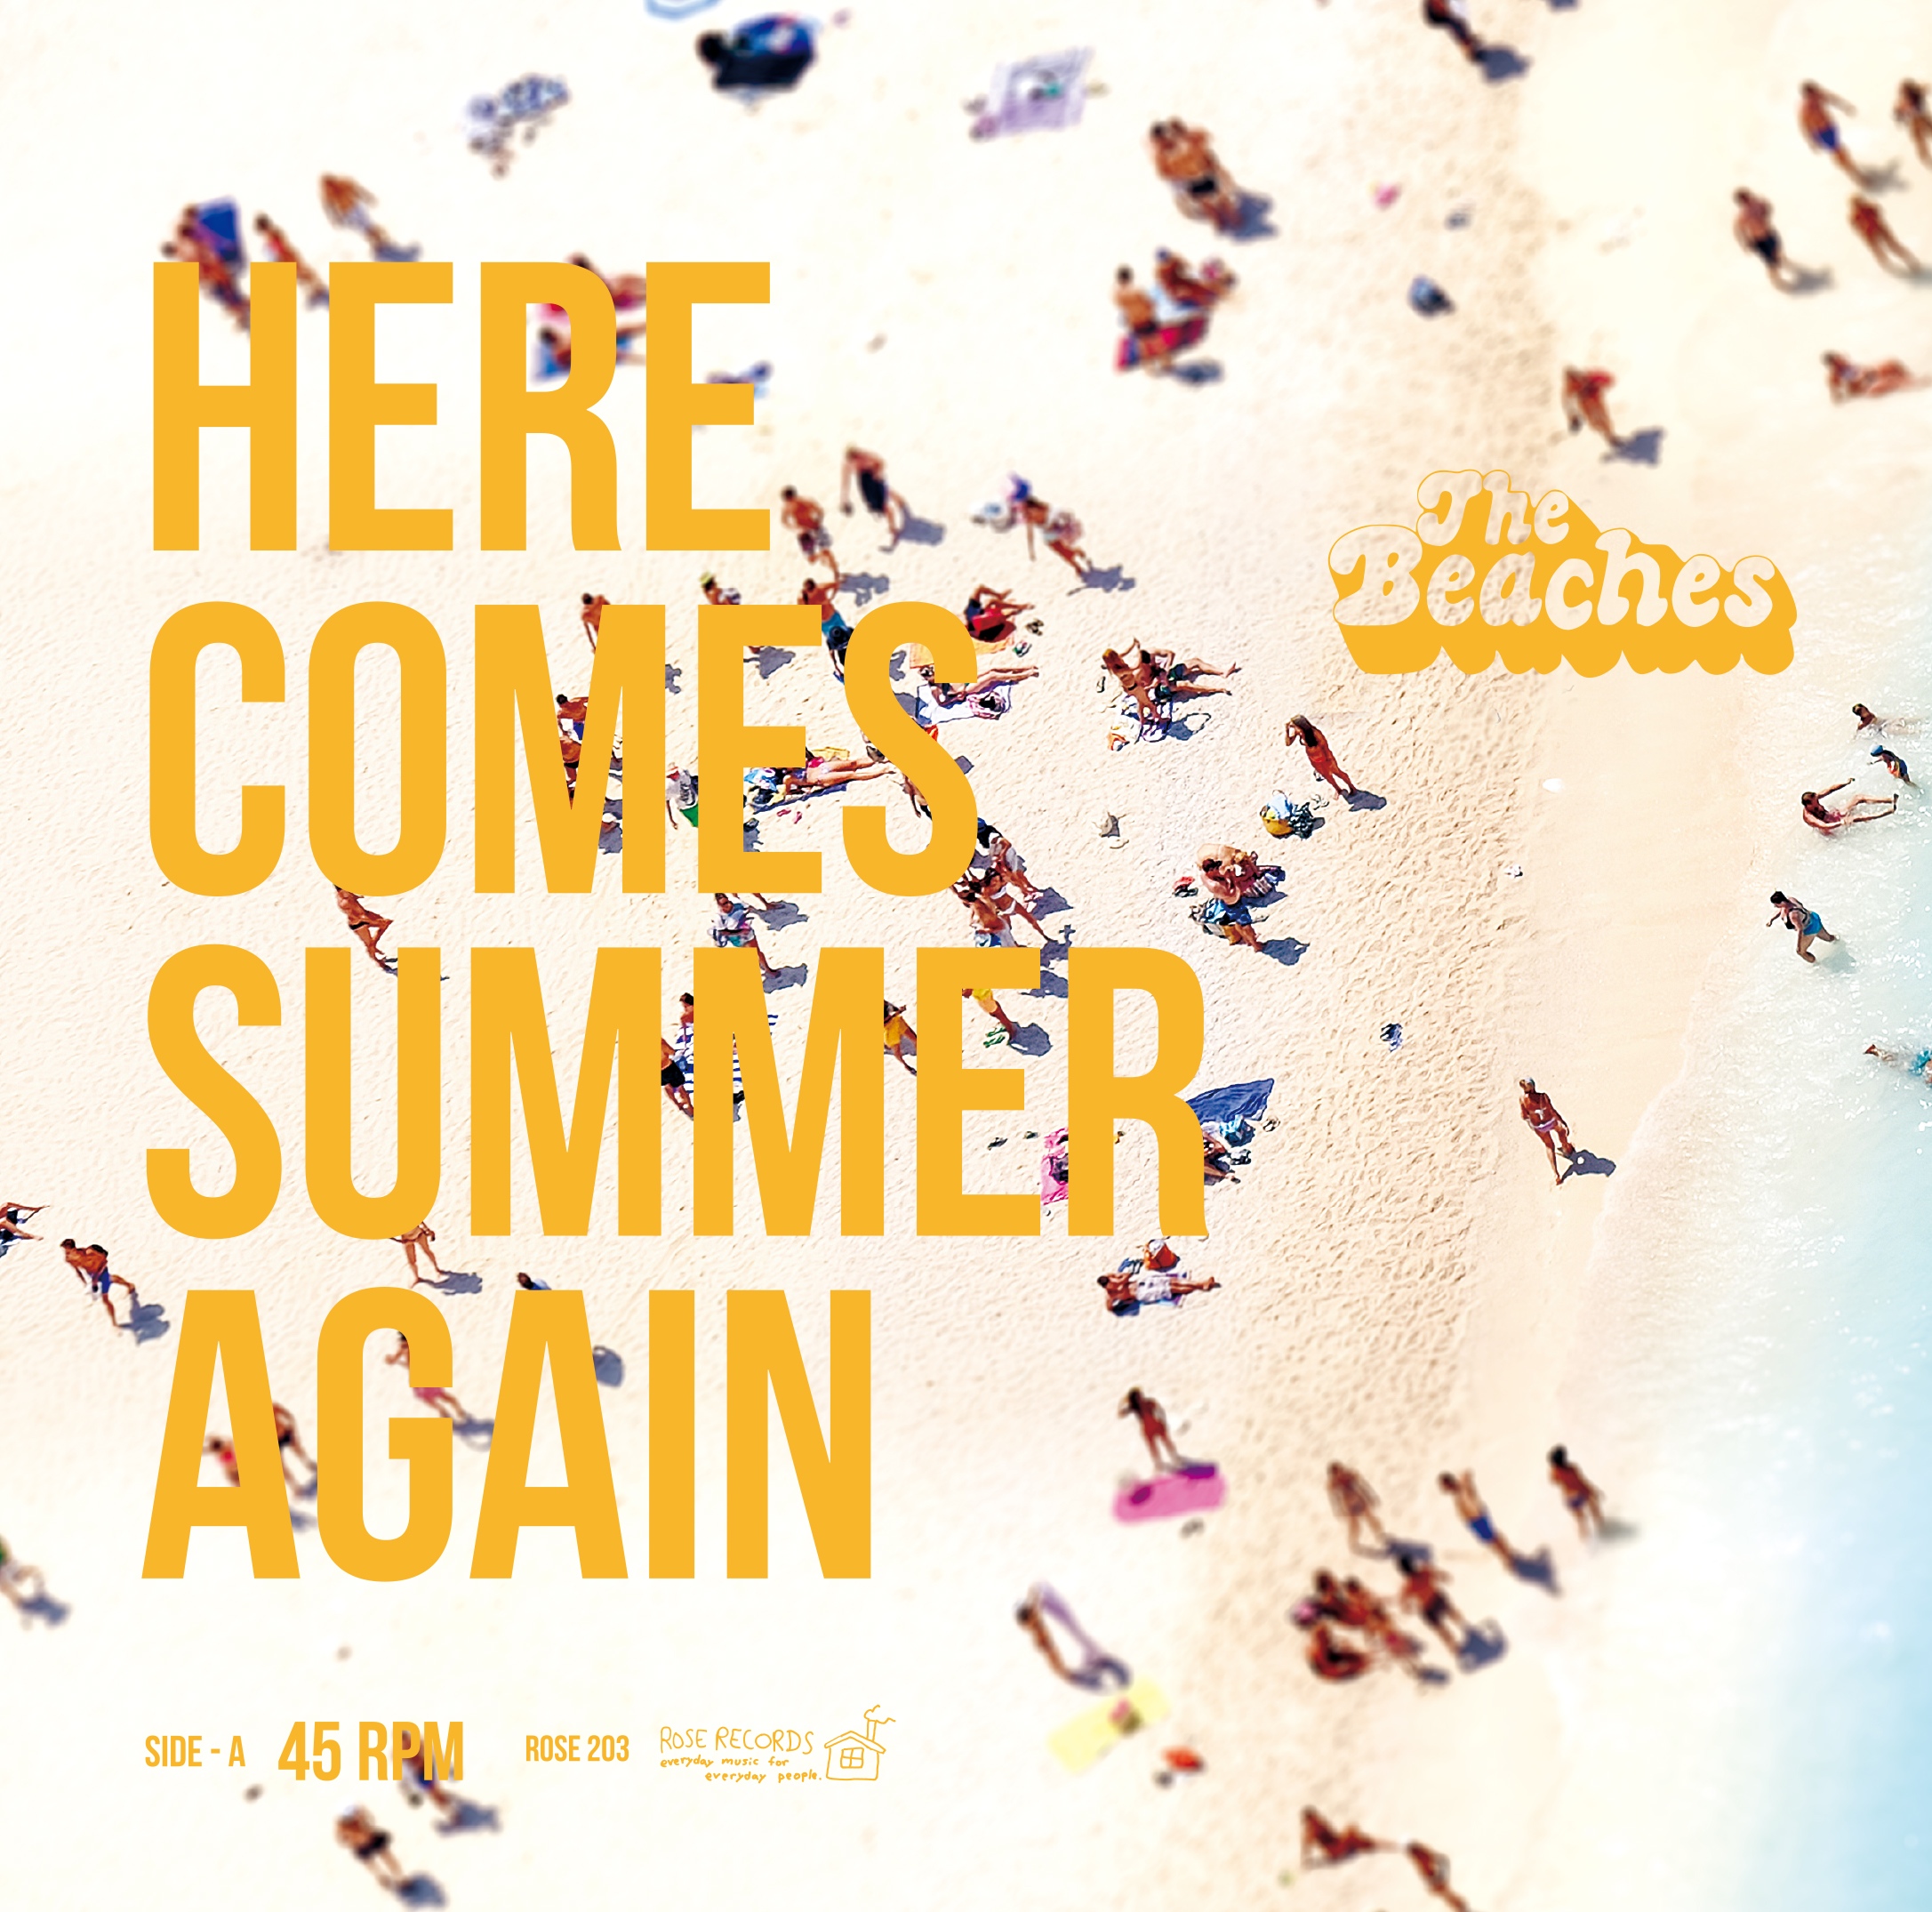 iڍ F THE BEACHES(7+CD) Here Comes Summer Again